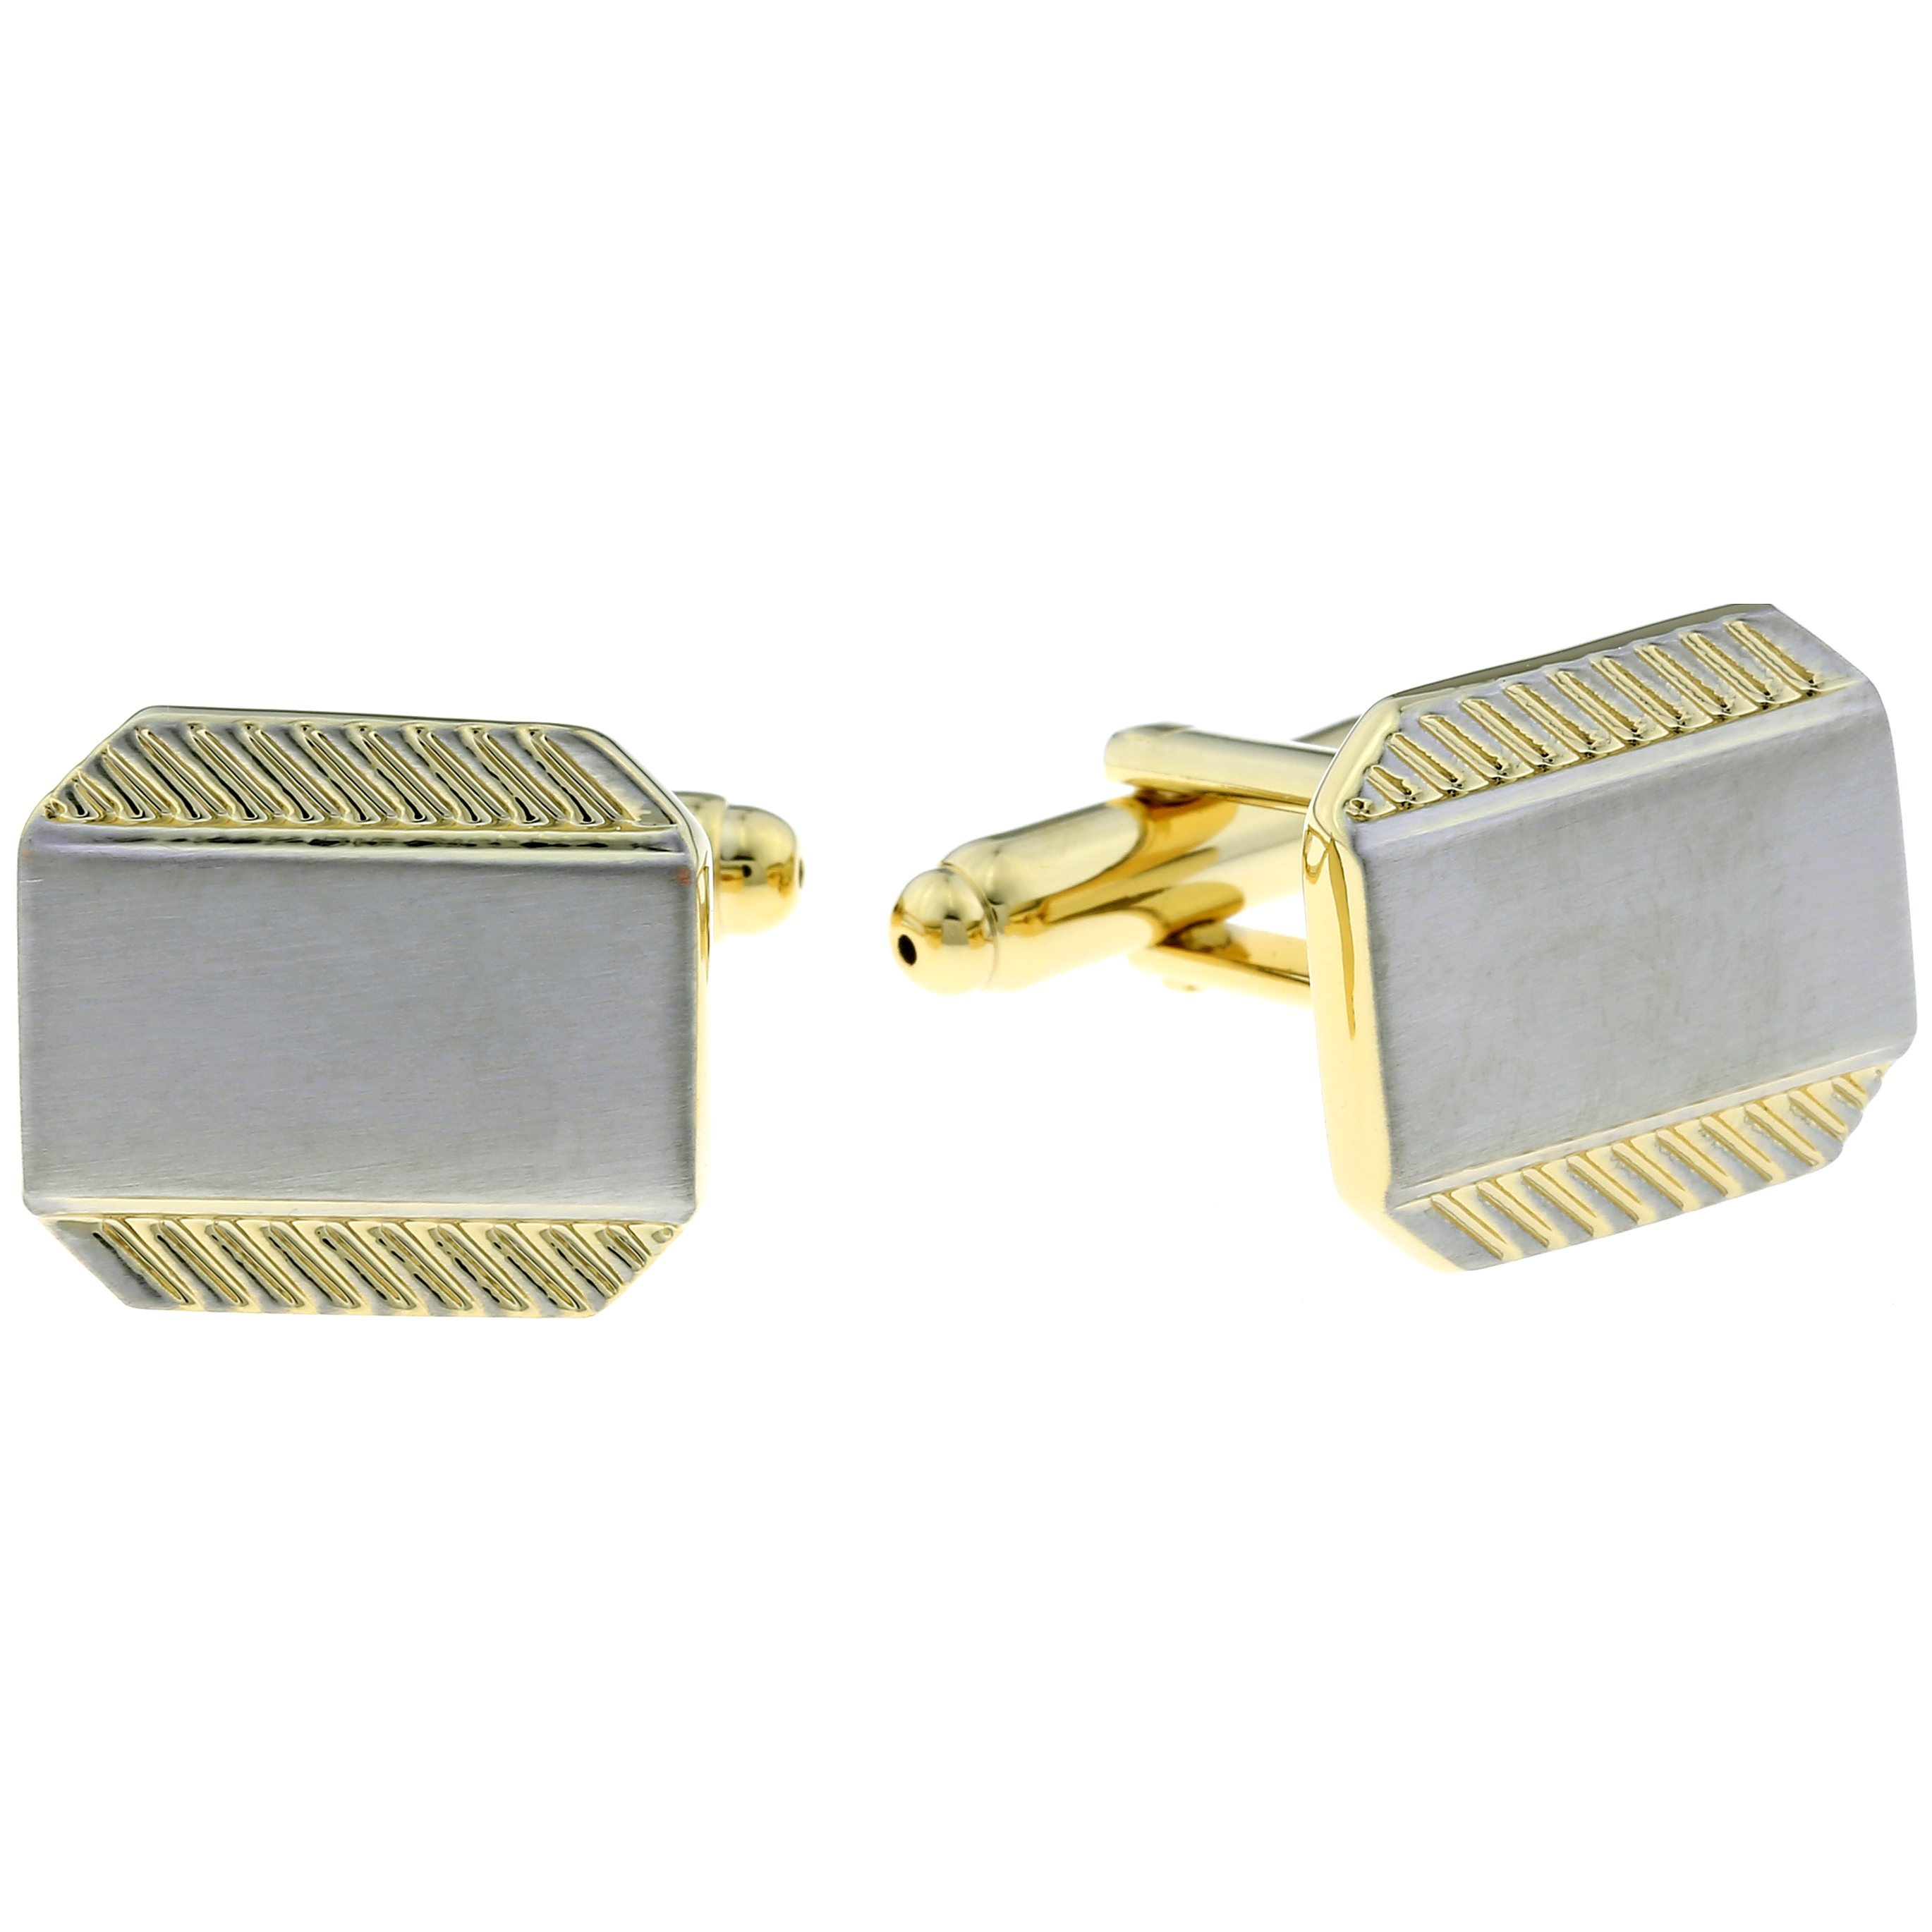 Stainless Steel Cuff Links with Ribbed Edge Design and Gold IP Accent